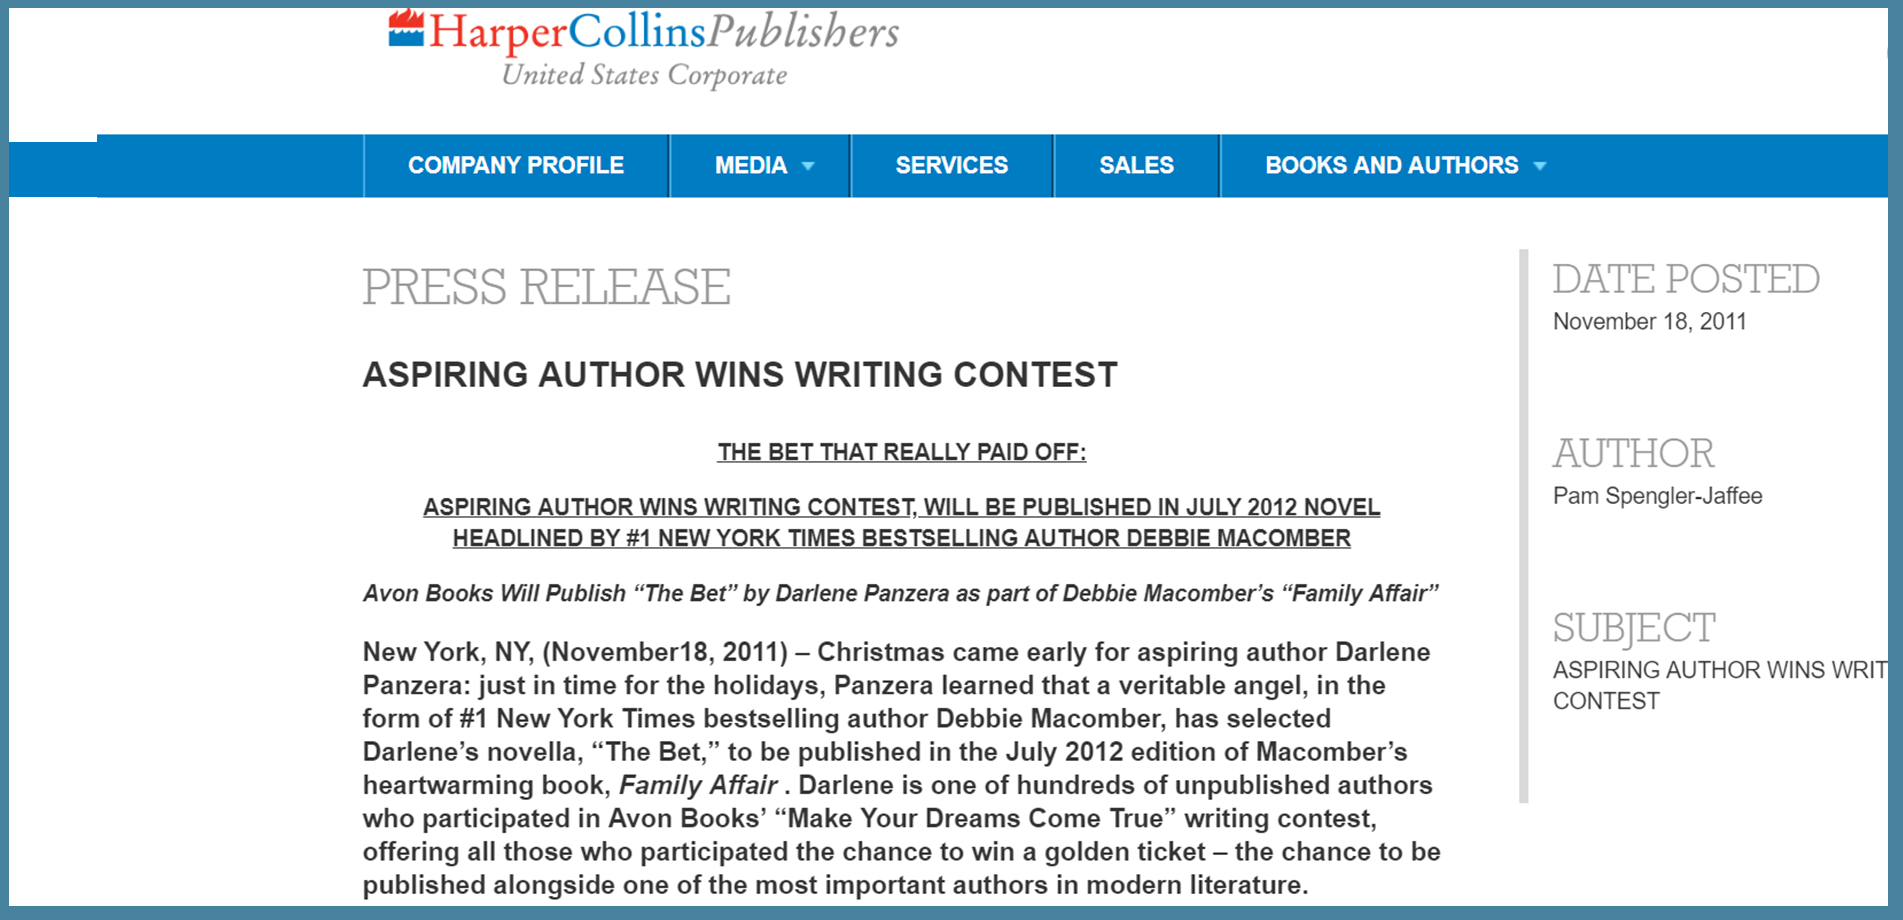 ASPIRING AUTHOR WINS WRITING CONTEST - HarperCollins Publishers 3